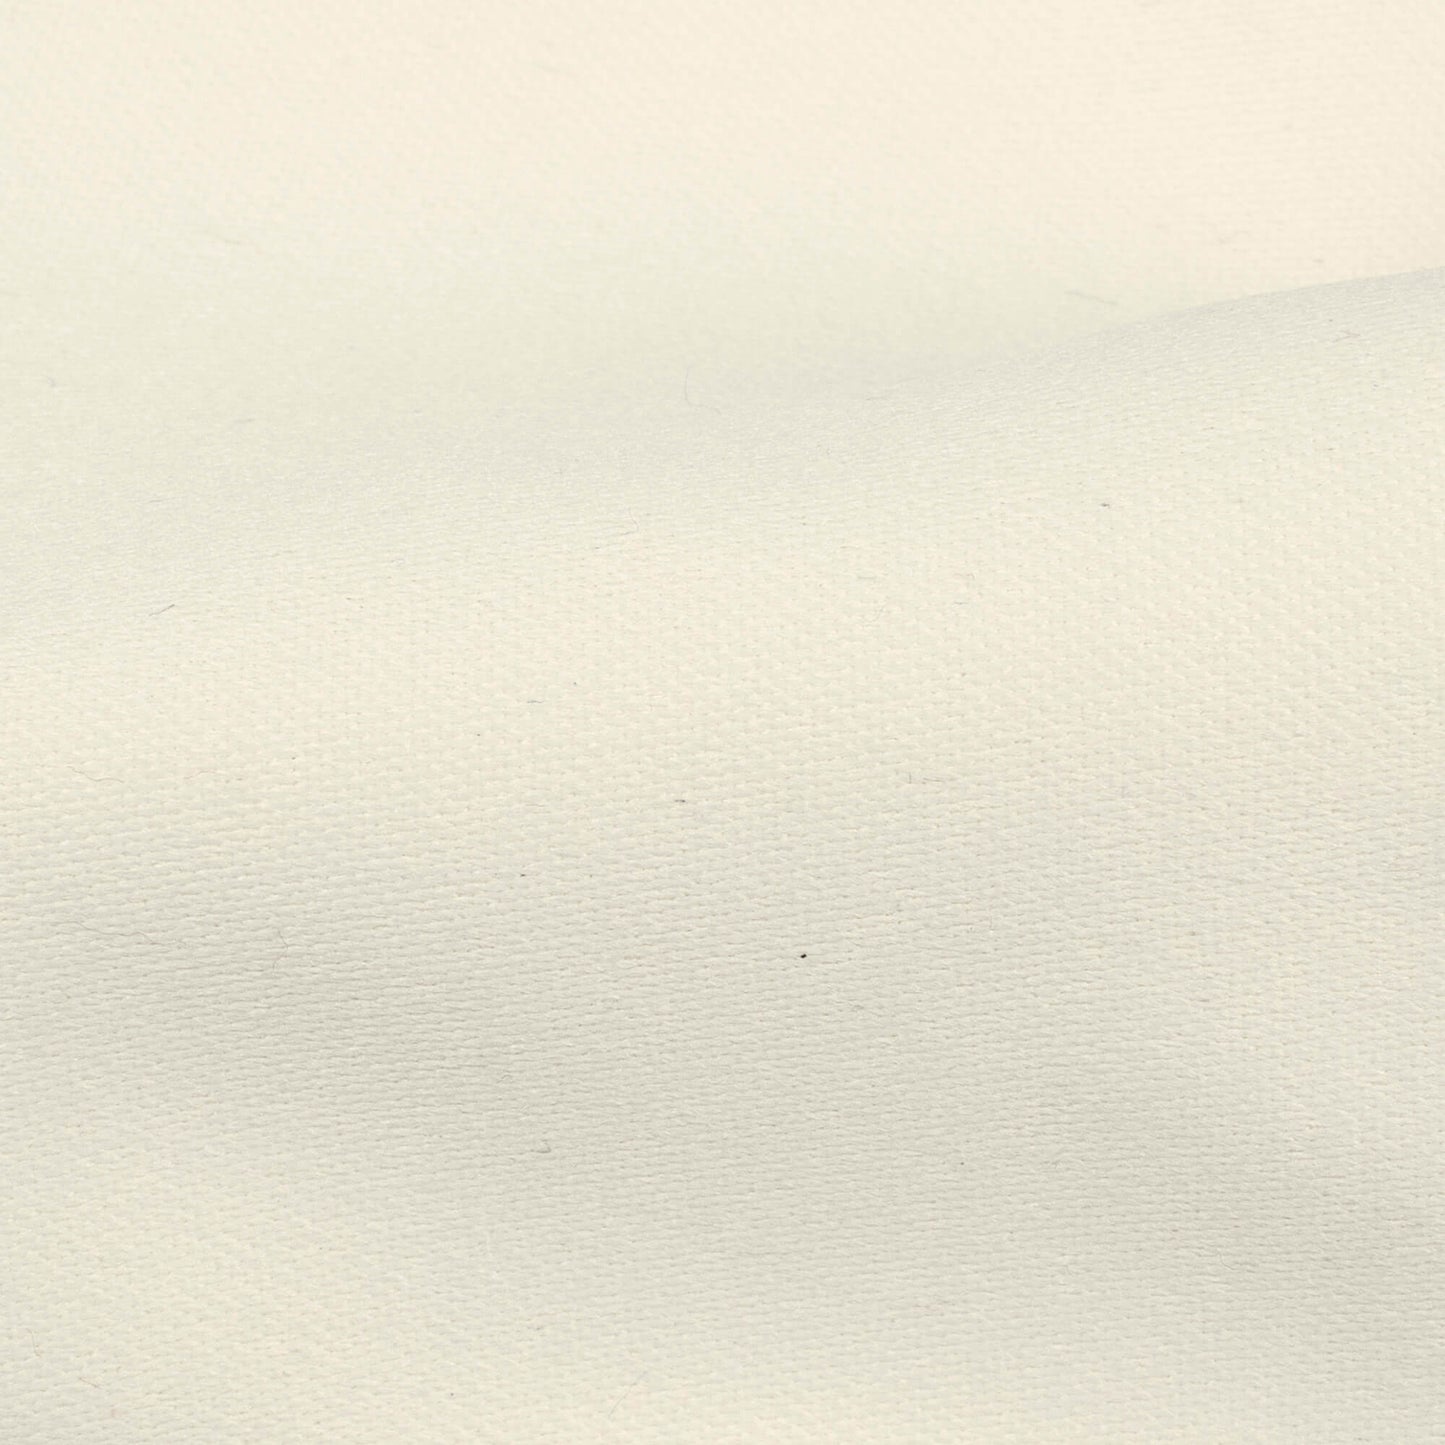 Ivory Cream Plain Dense Crepe Satin Exclusive Shirting Fabric (Width 36 Inches)